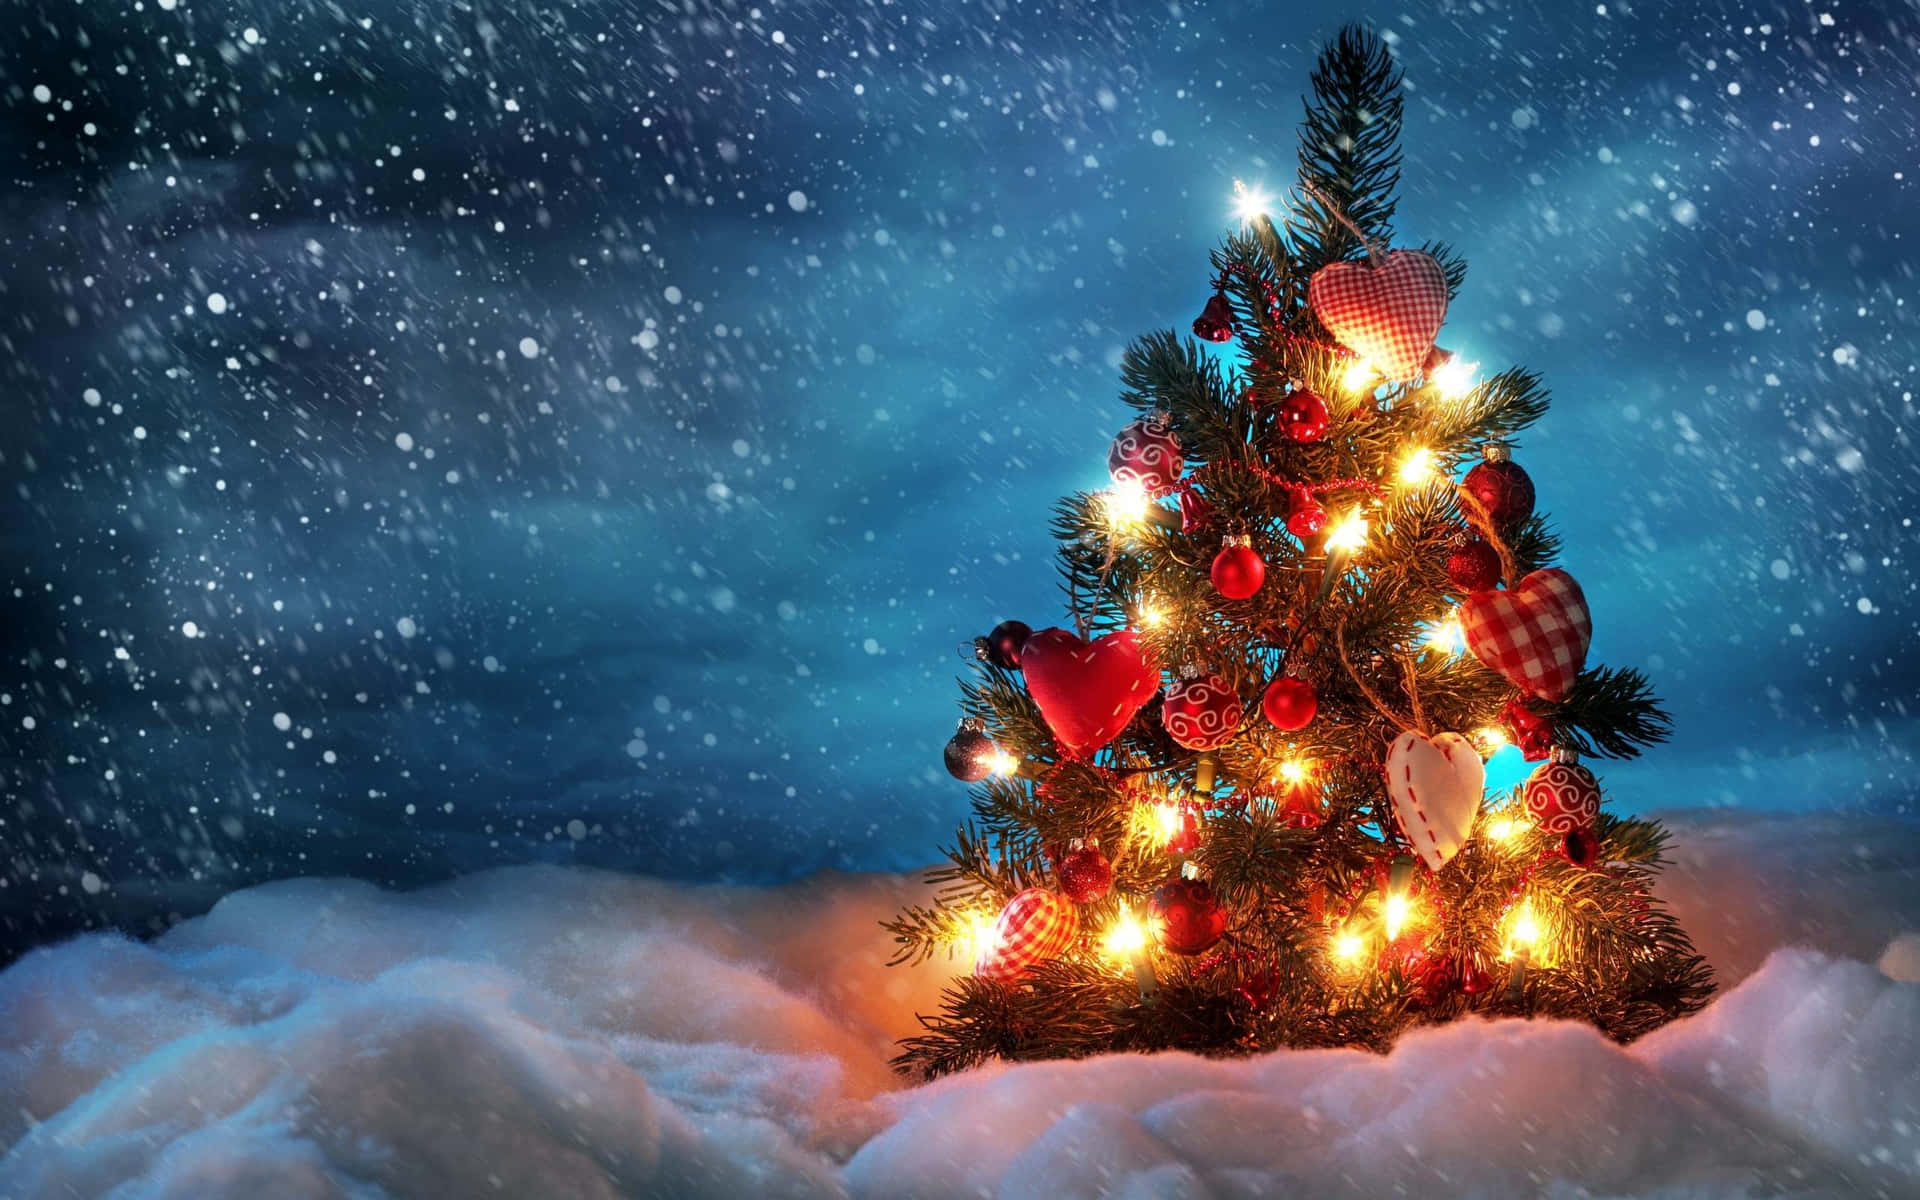 Christmas Tree In The Snow Wallpaper